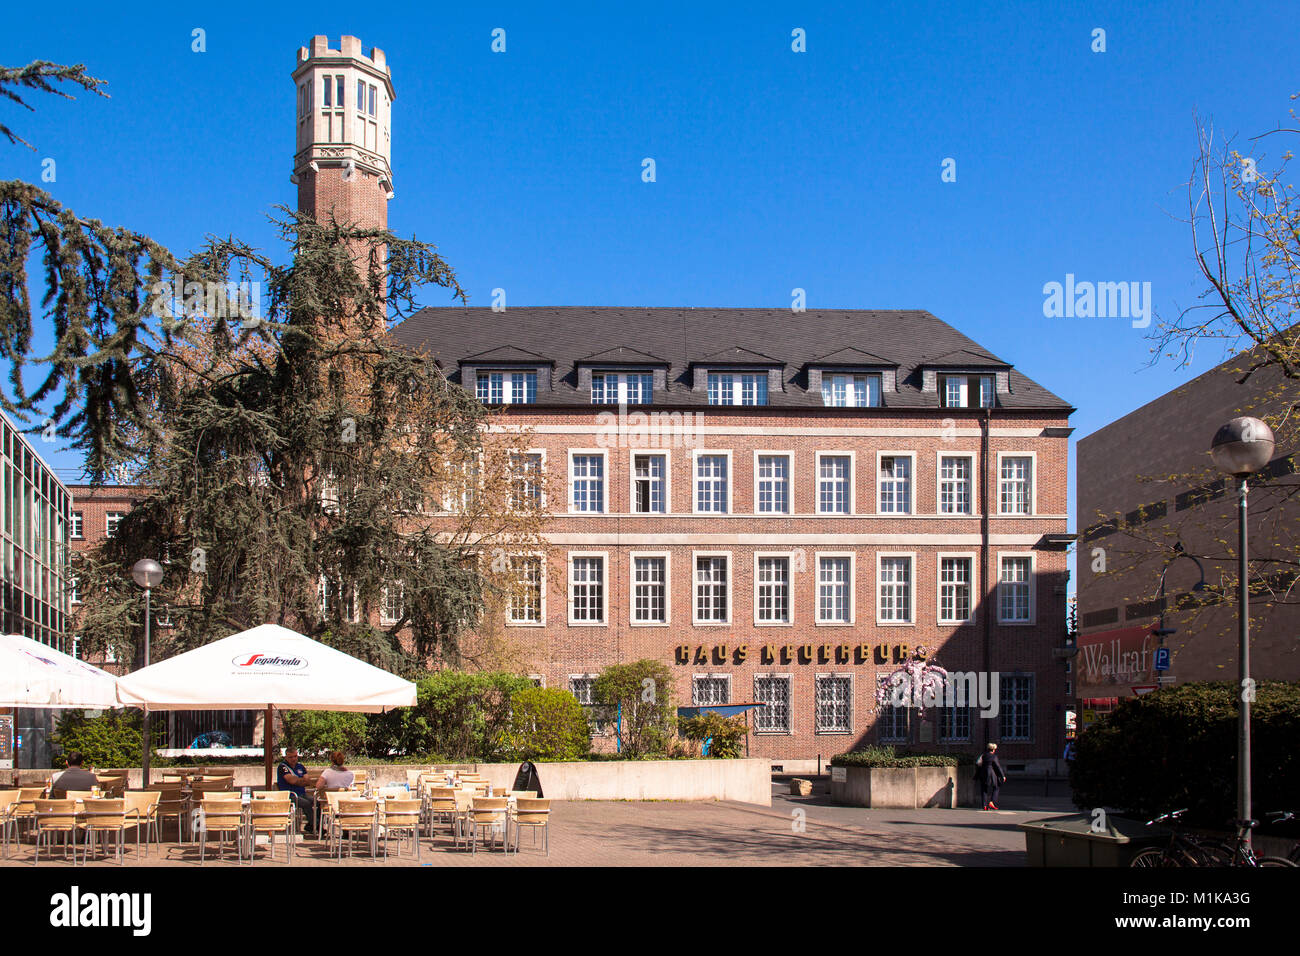 Germany Cologne The Building Haus Neuerburg At The Square Guelichplatz In The Historic Town Deutschland Koeln Haus Neuerburg Am Guelichplatz In Stock Photo Alamy